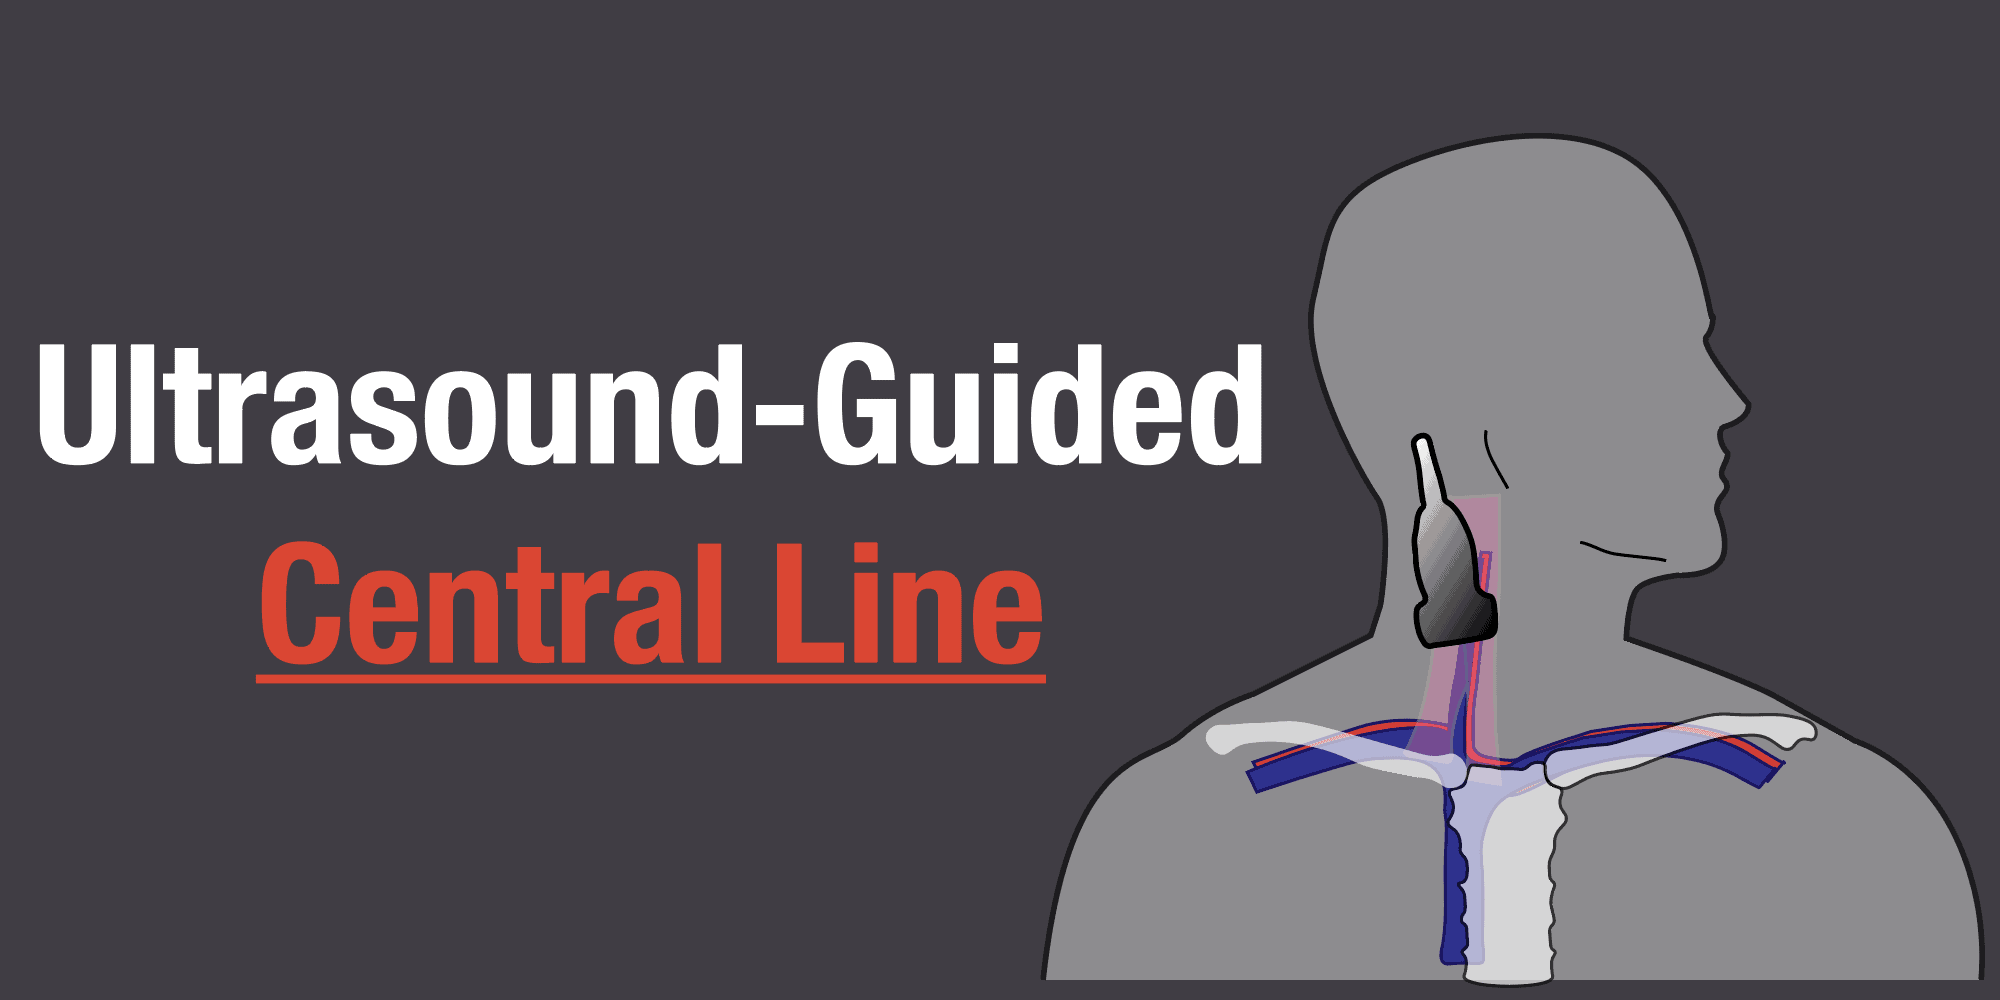 Ultrasound Guided Central Line Featured Image Illustration CVL